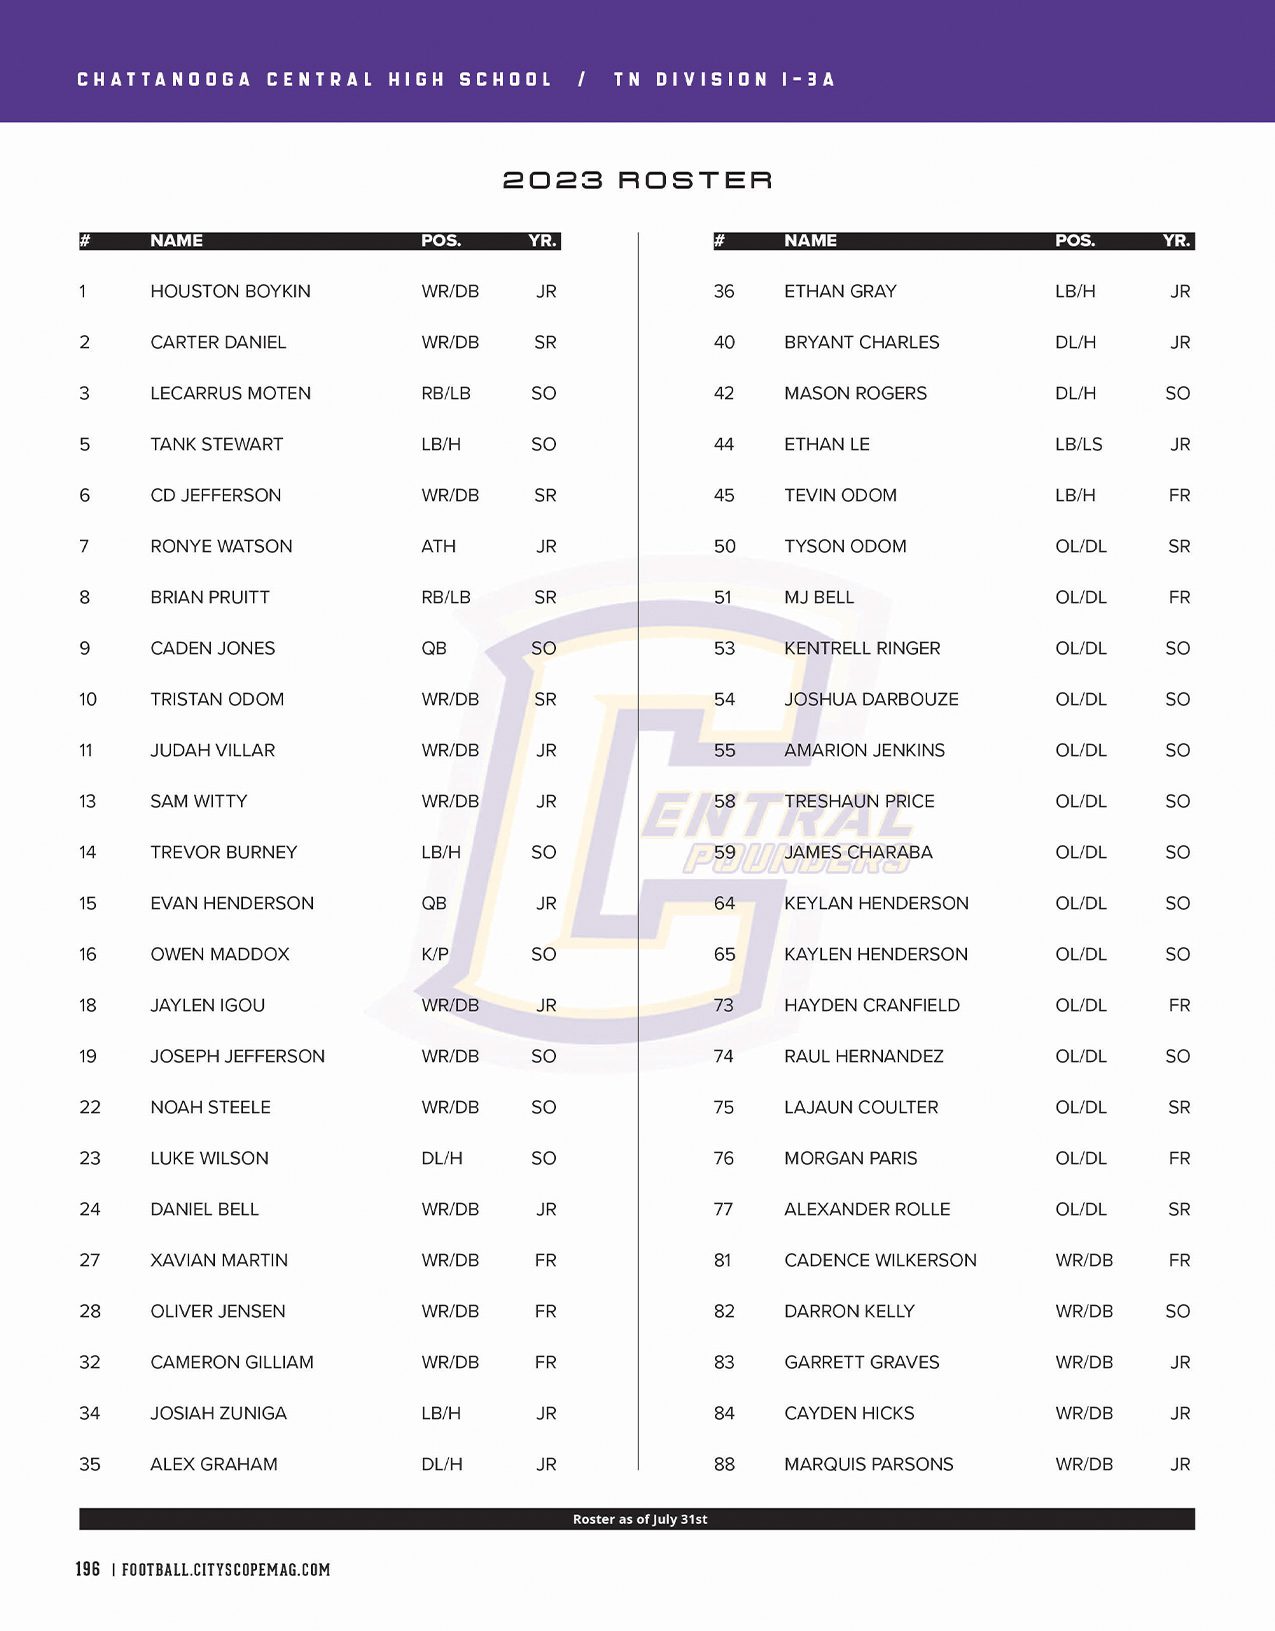 Chattanooga Central High School's 2023 Roster